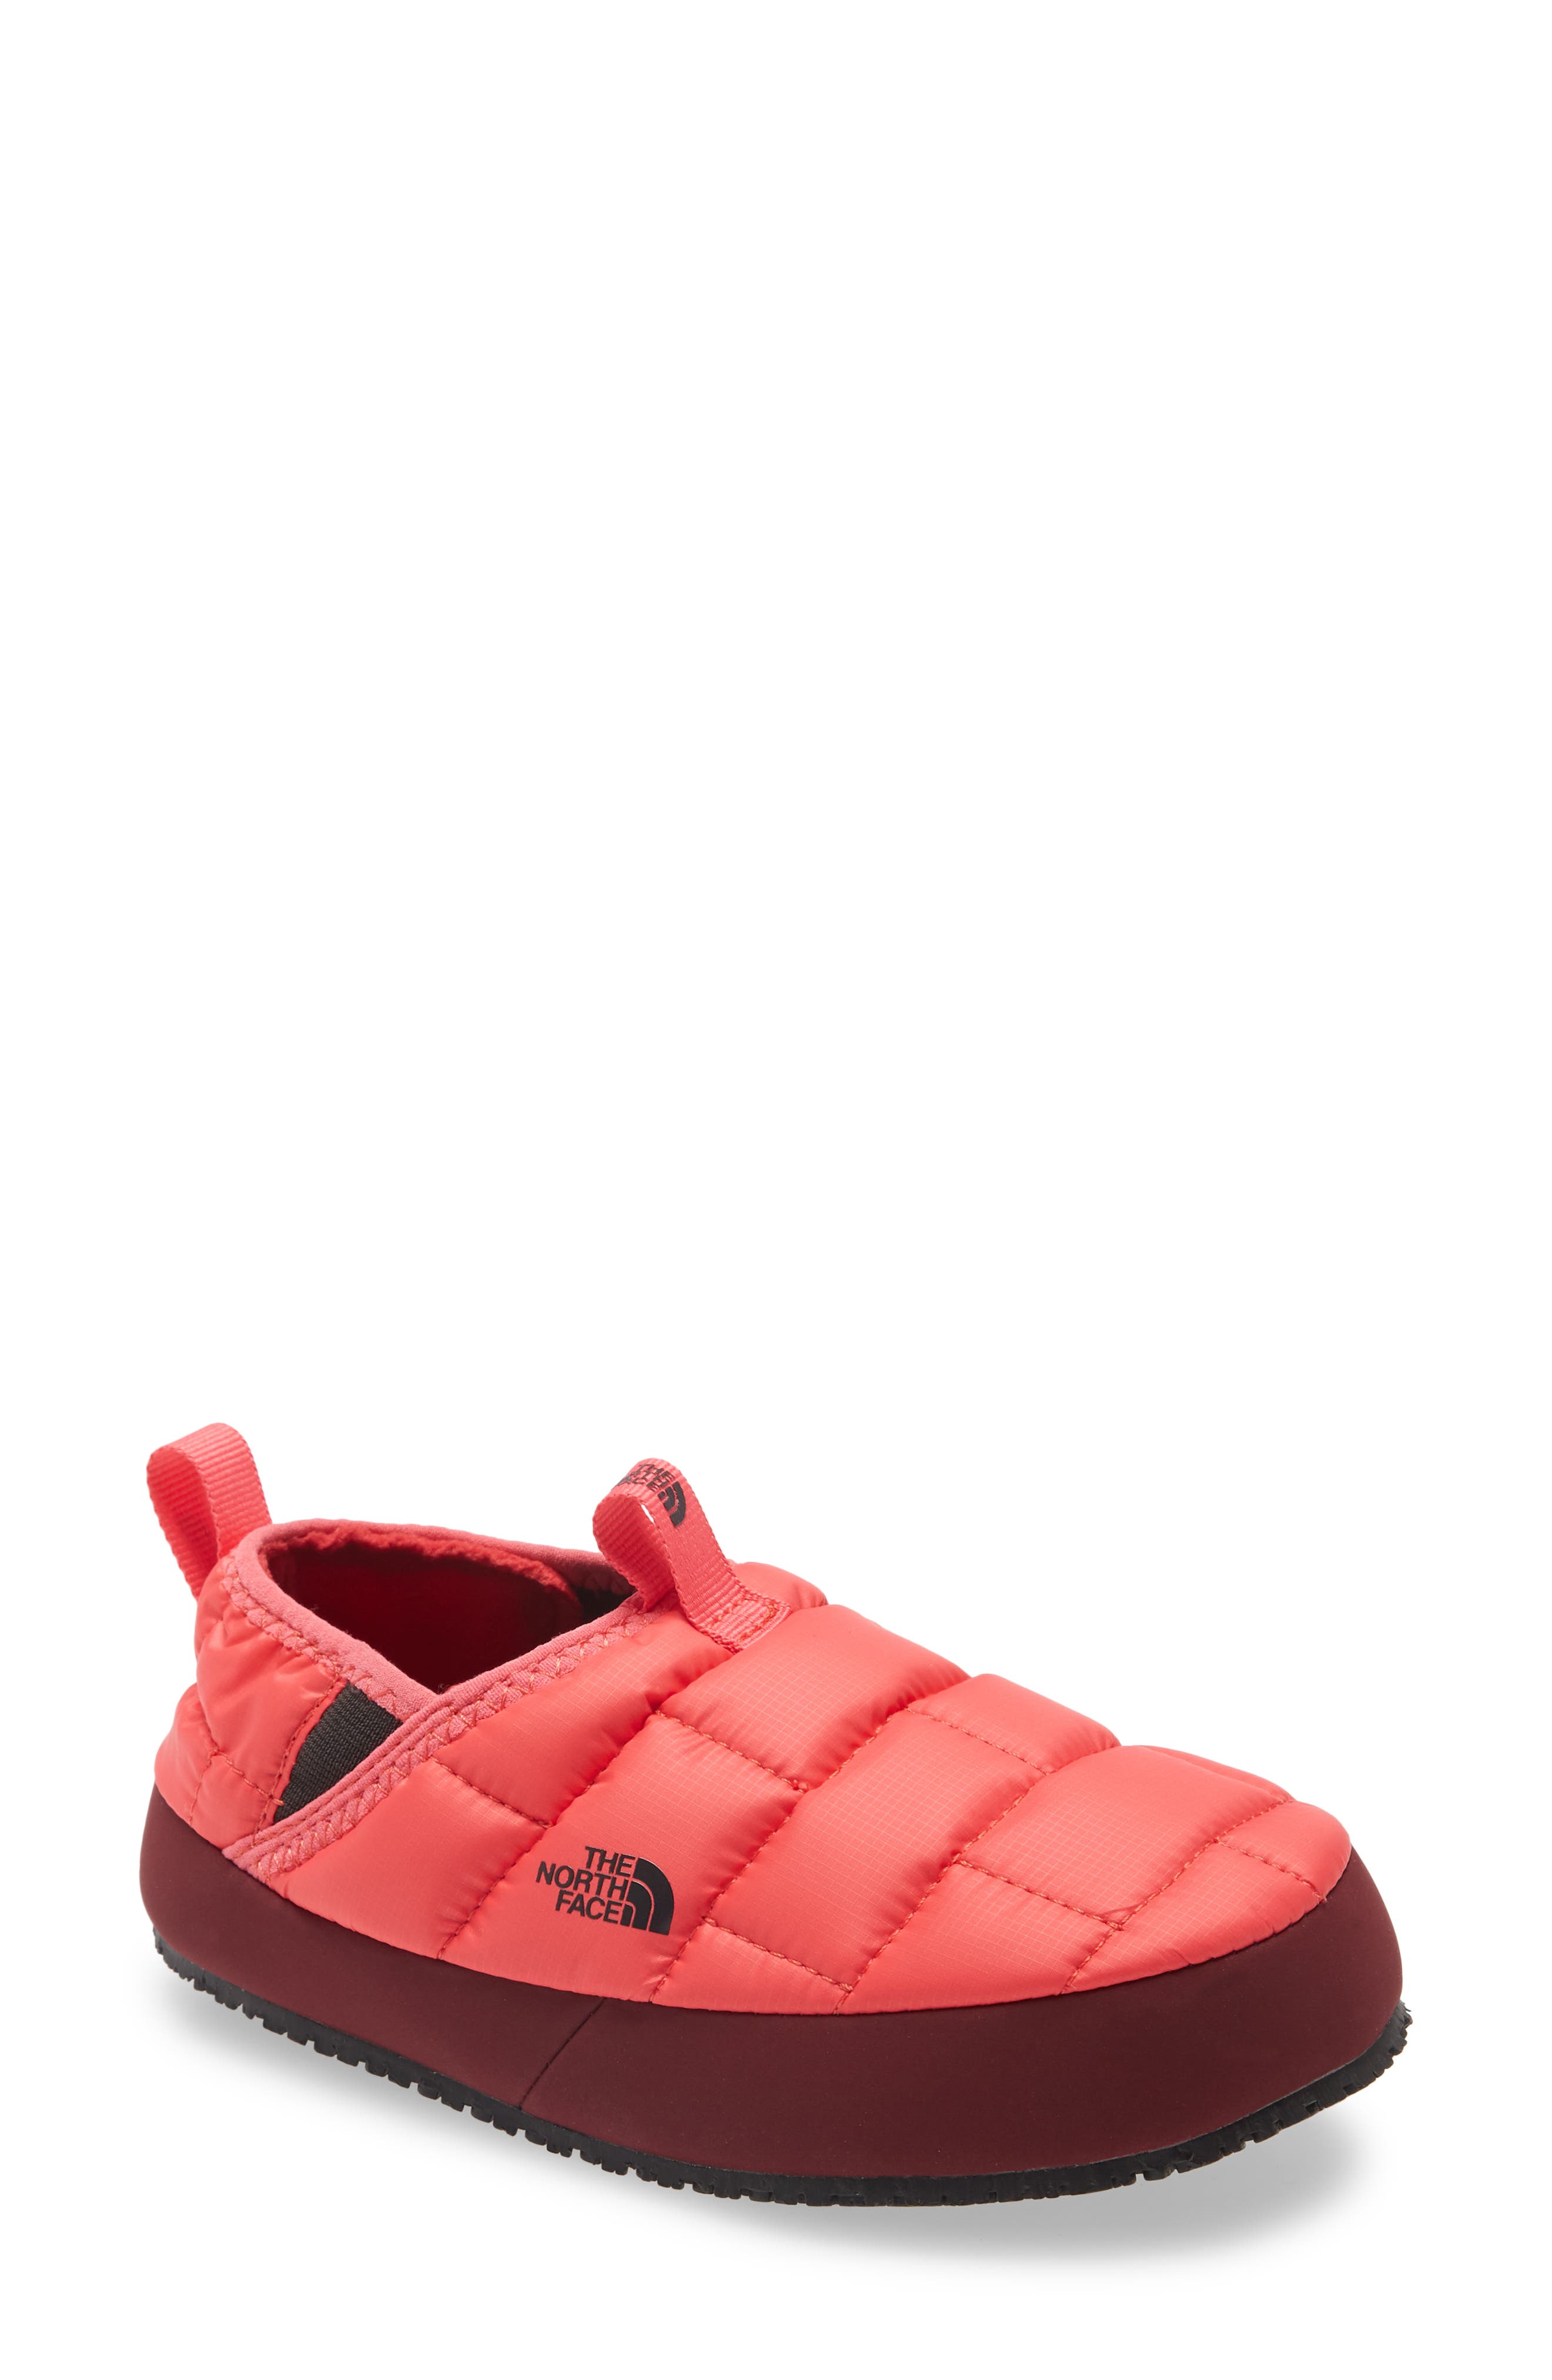 north face thermal slippers